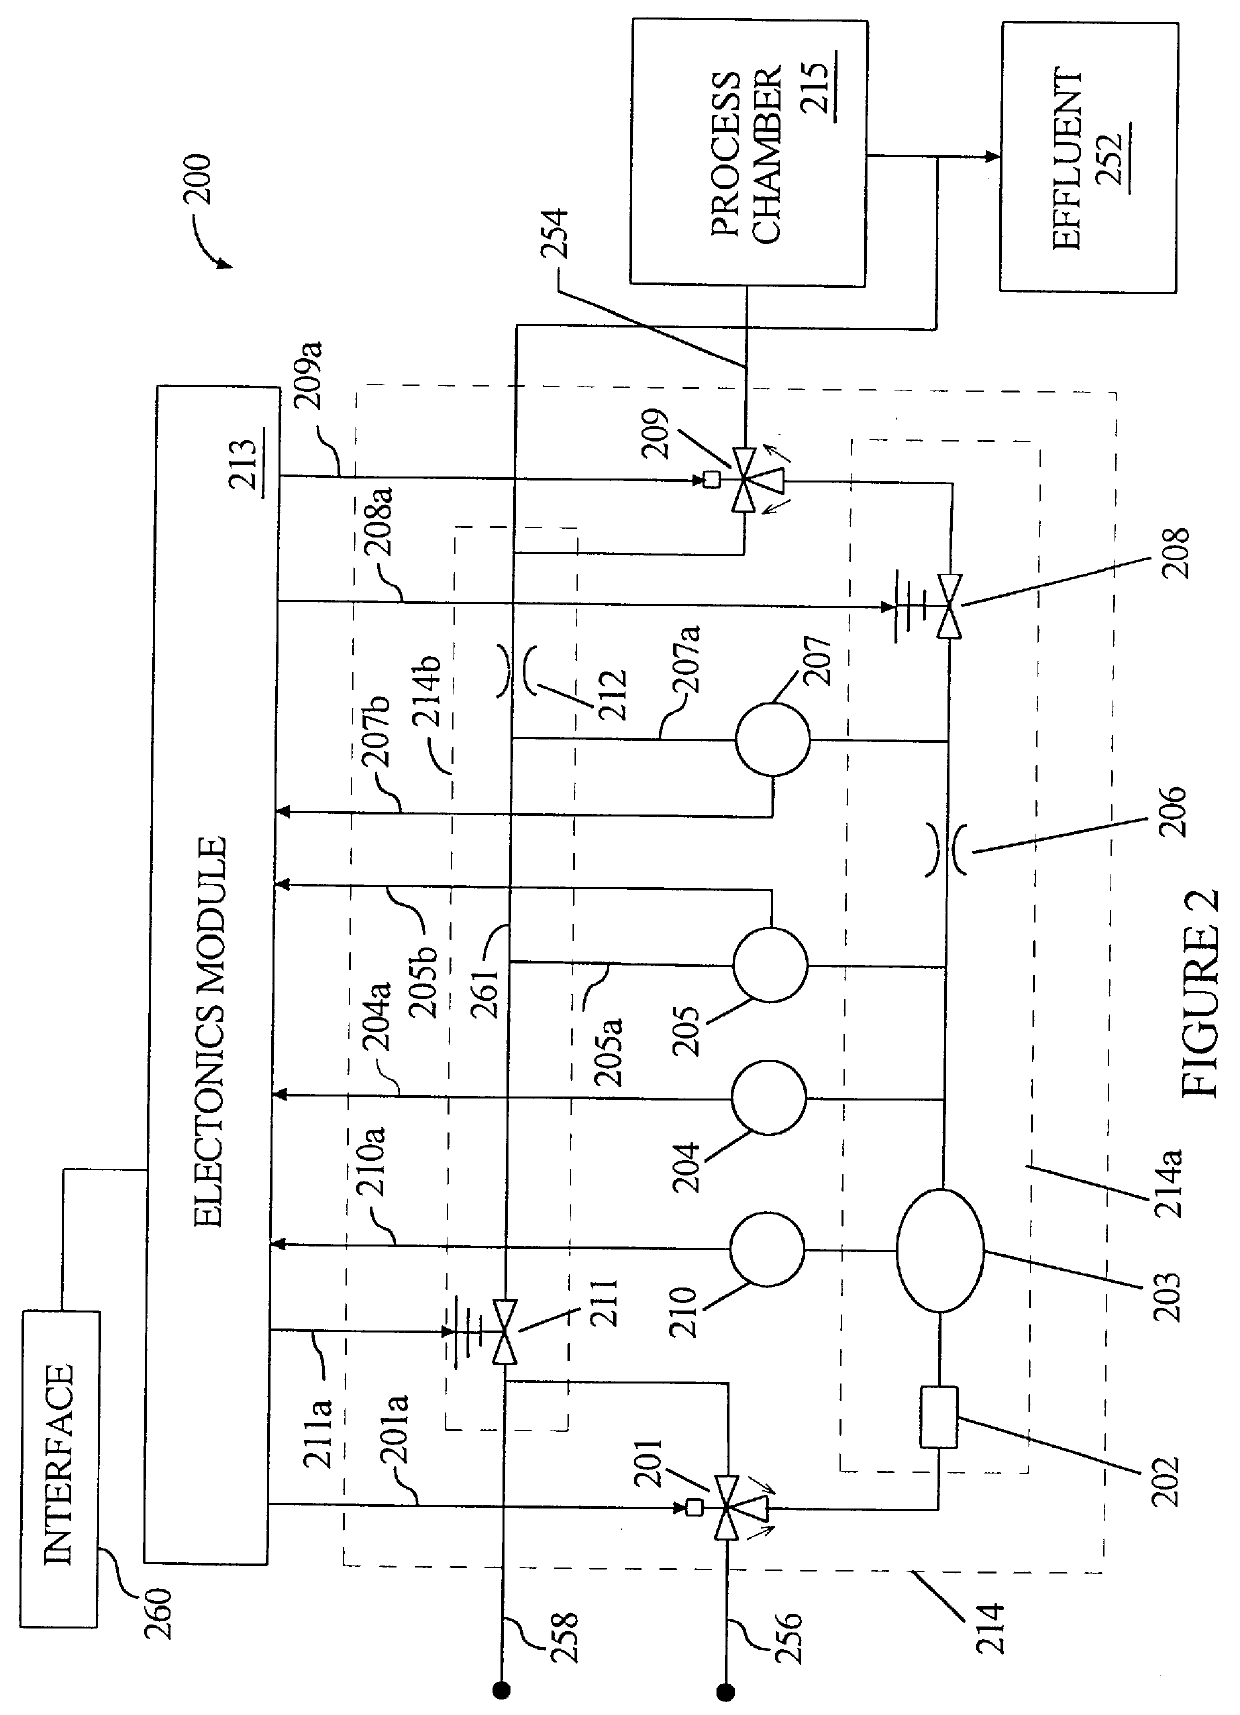 Method for wide range gas flow system with real time flow measurement and correction